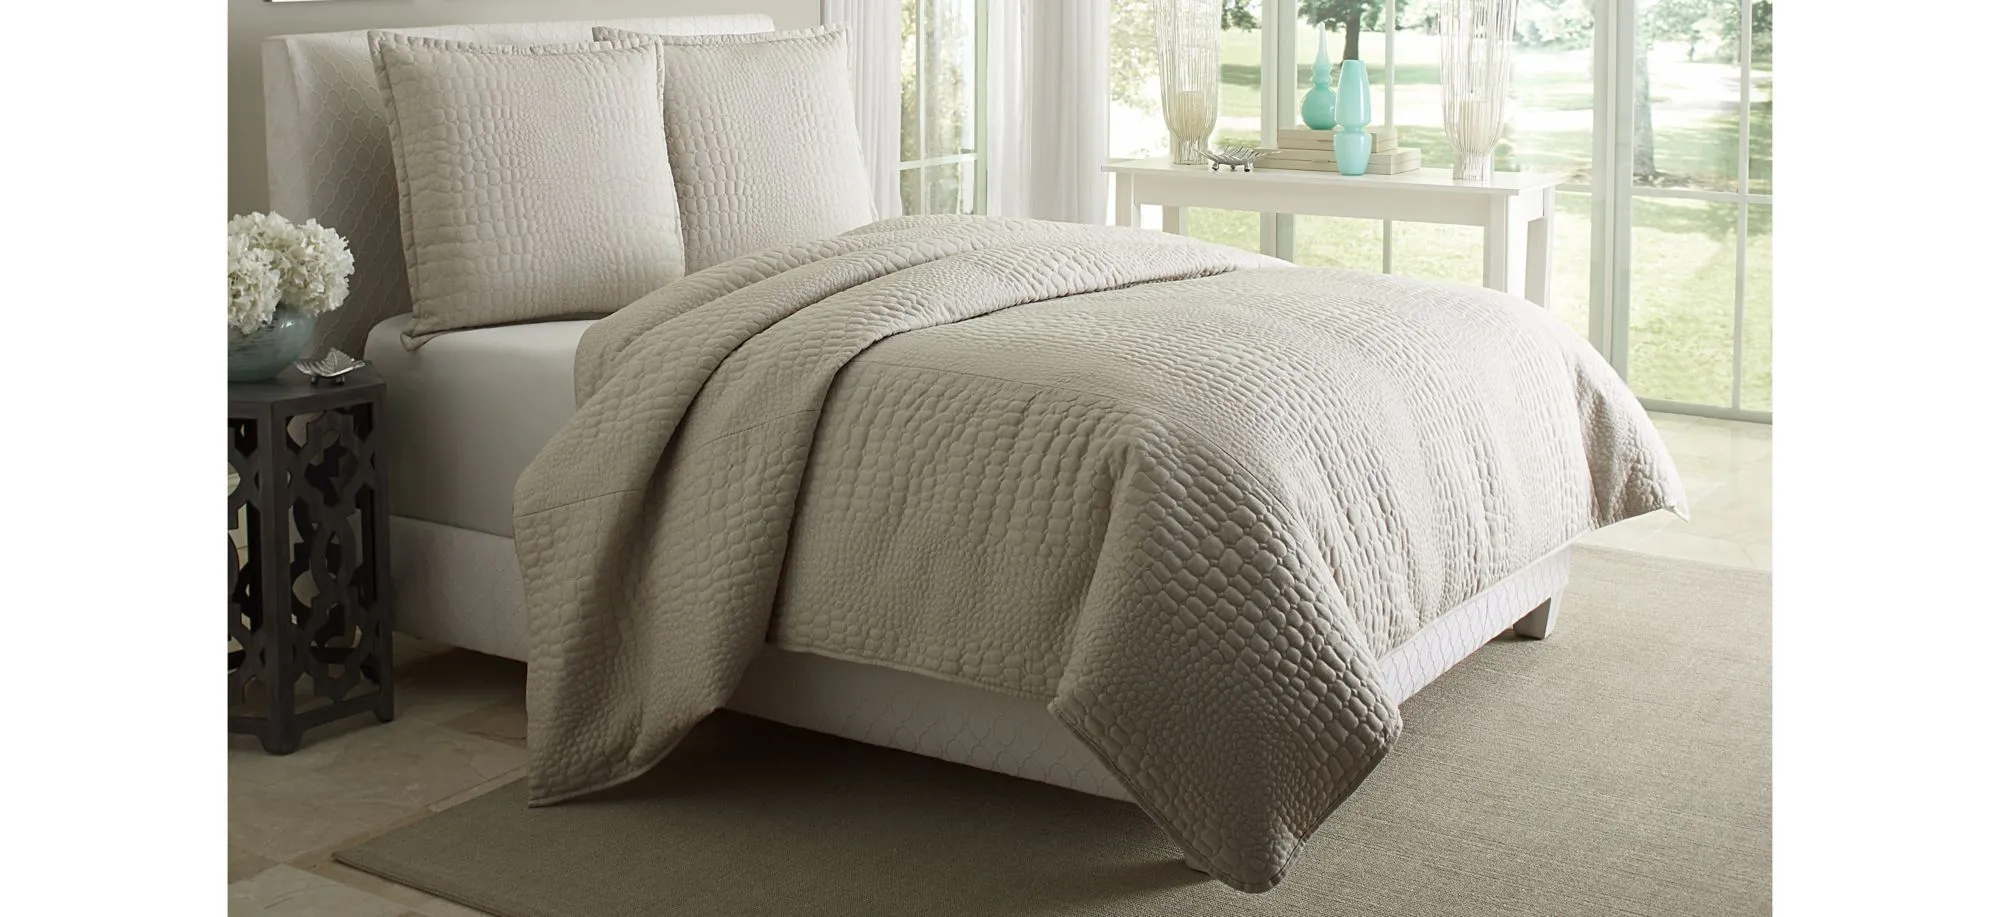 Dash 3-Pc. Duvet Set in Natural by Amini Innovation